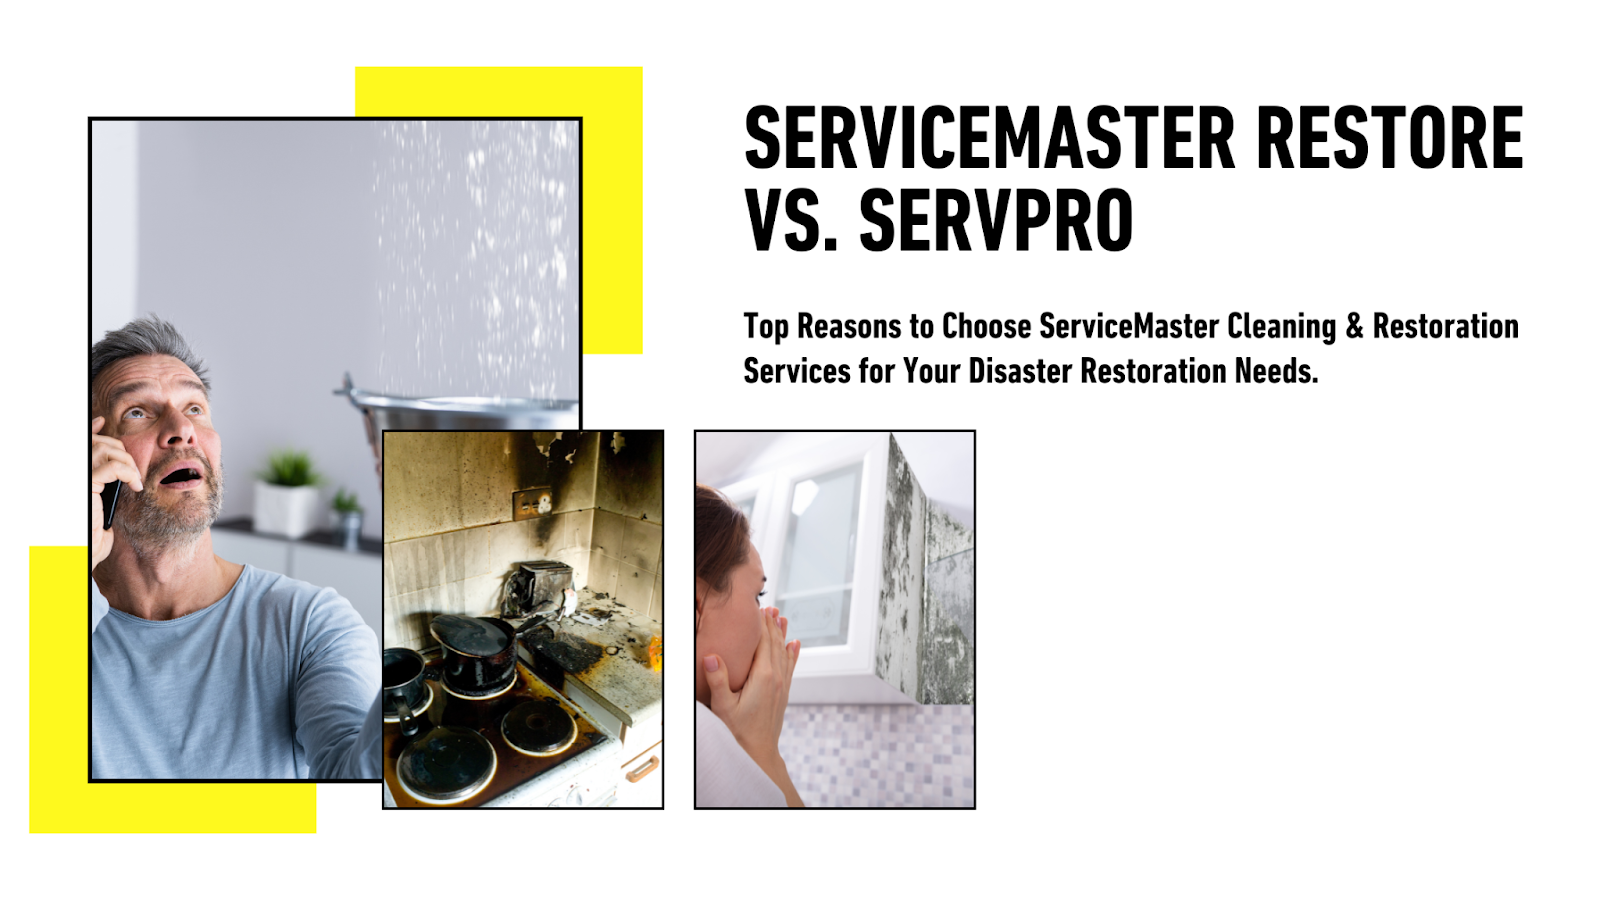 Choosing ServiceMaster Cleaning & Restoration Services